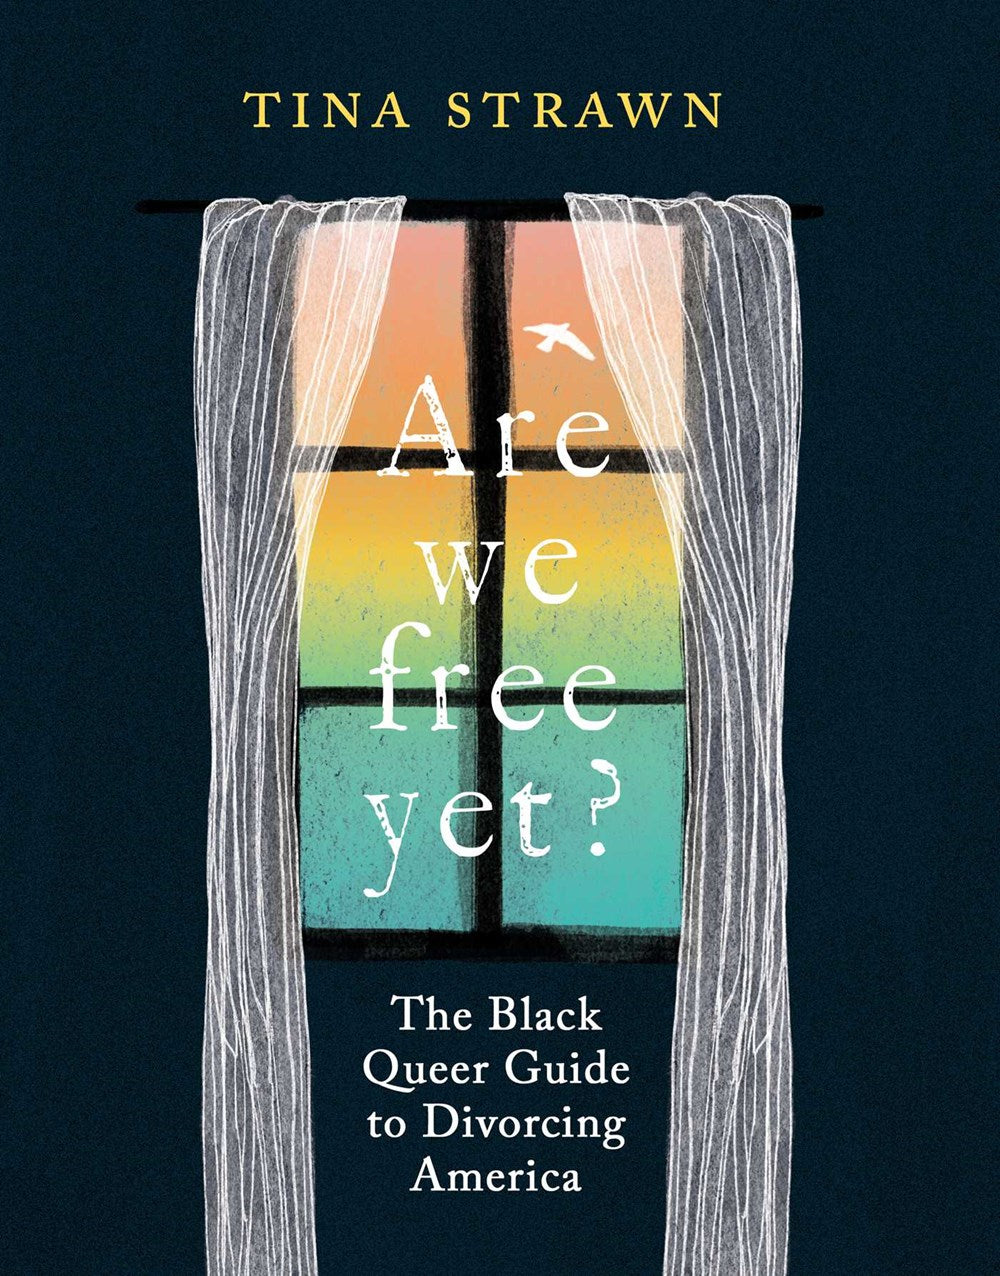 Are We Free Yet?: The Black Queer Guide to Divorcing America by Tina Strawn (Paperback)